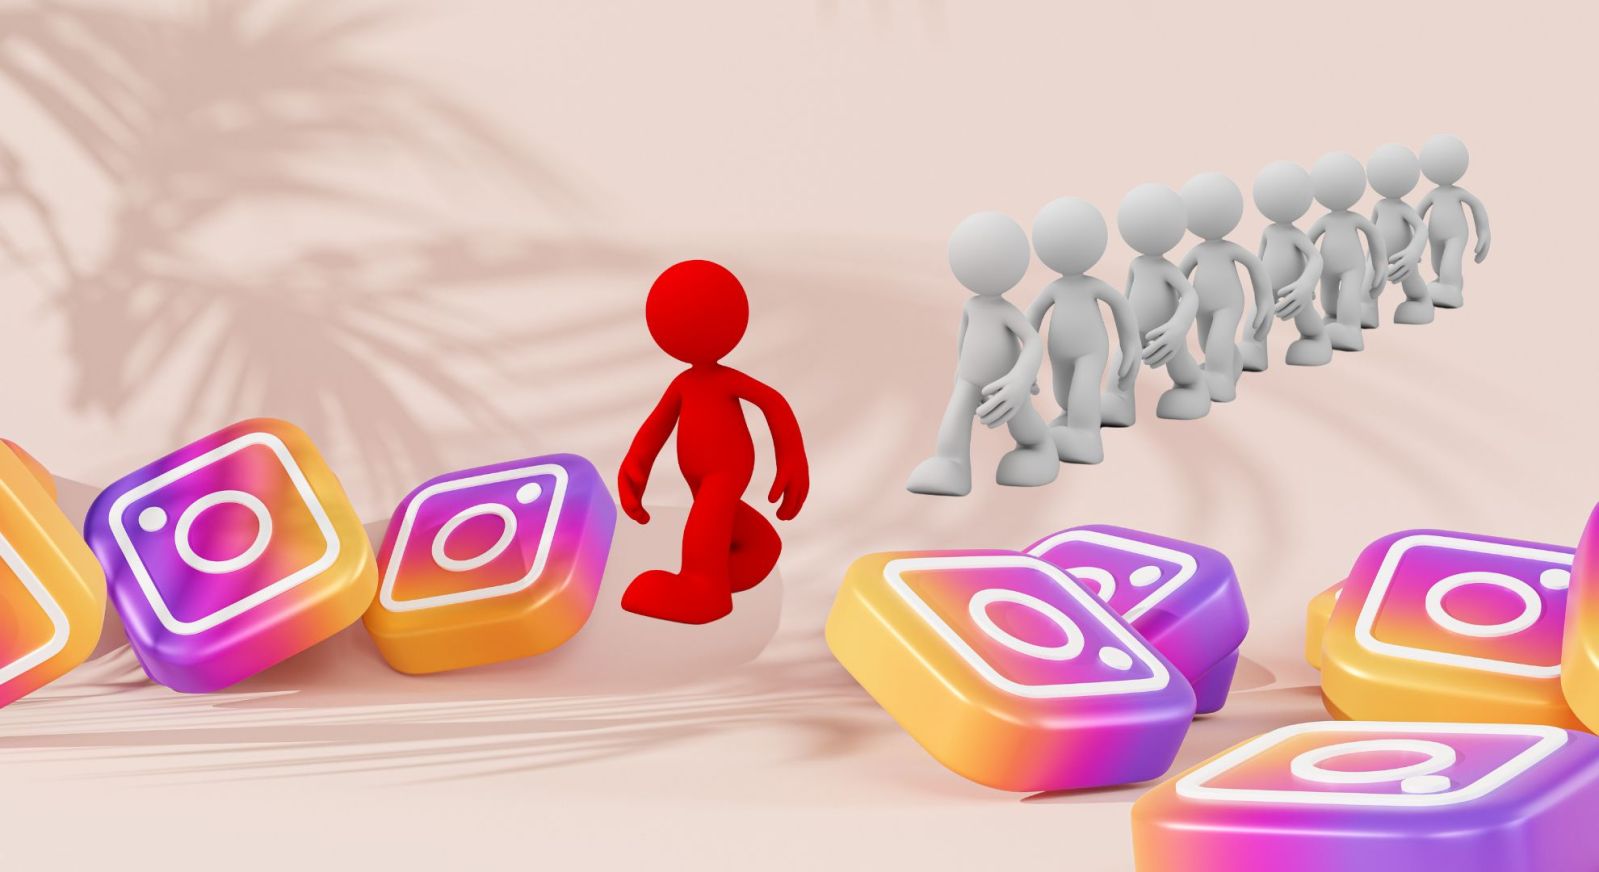 From-Zero-to-Hero-A-Step-by-Step-Guide-to-Getting-Noticed-on-Instagram